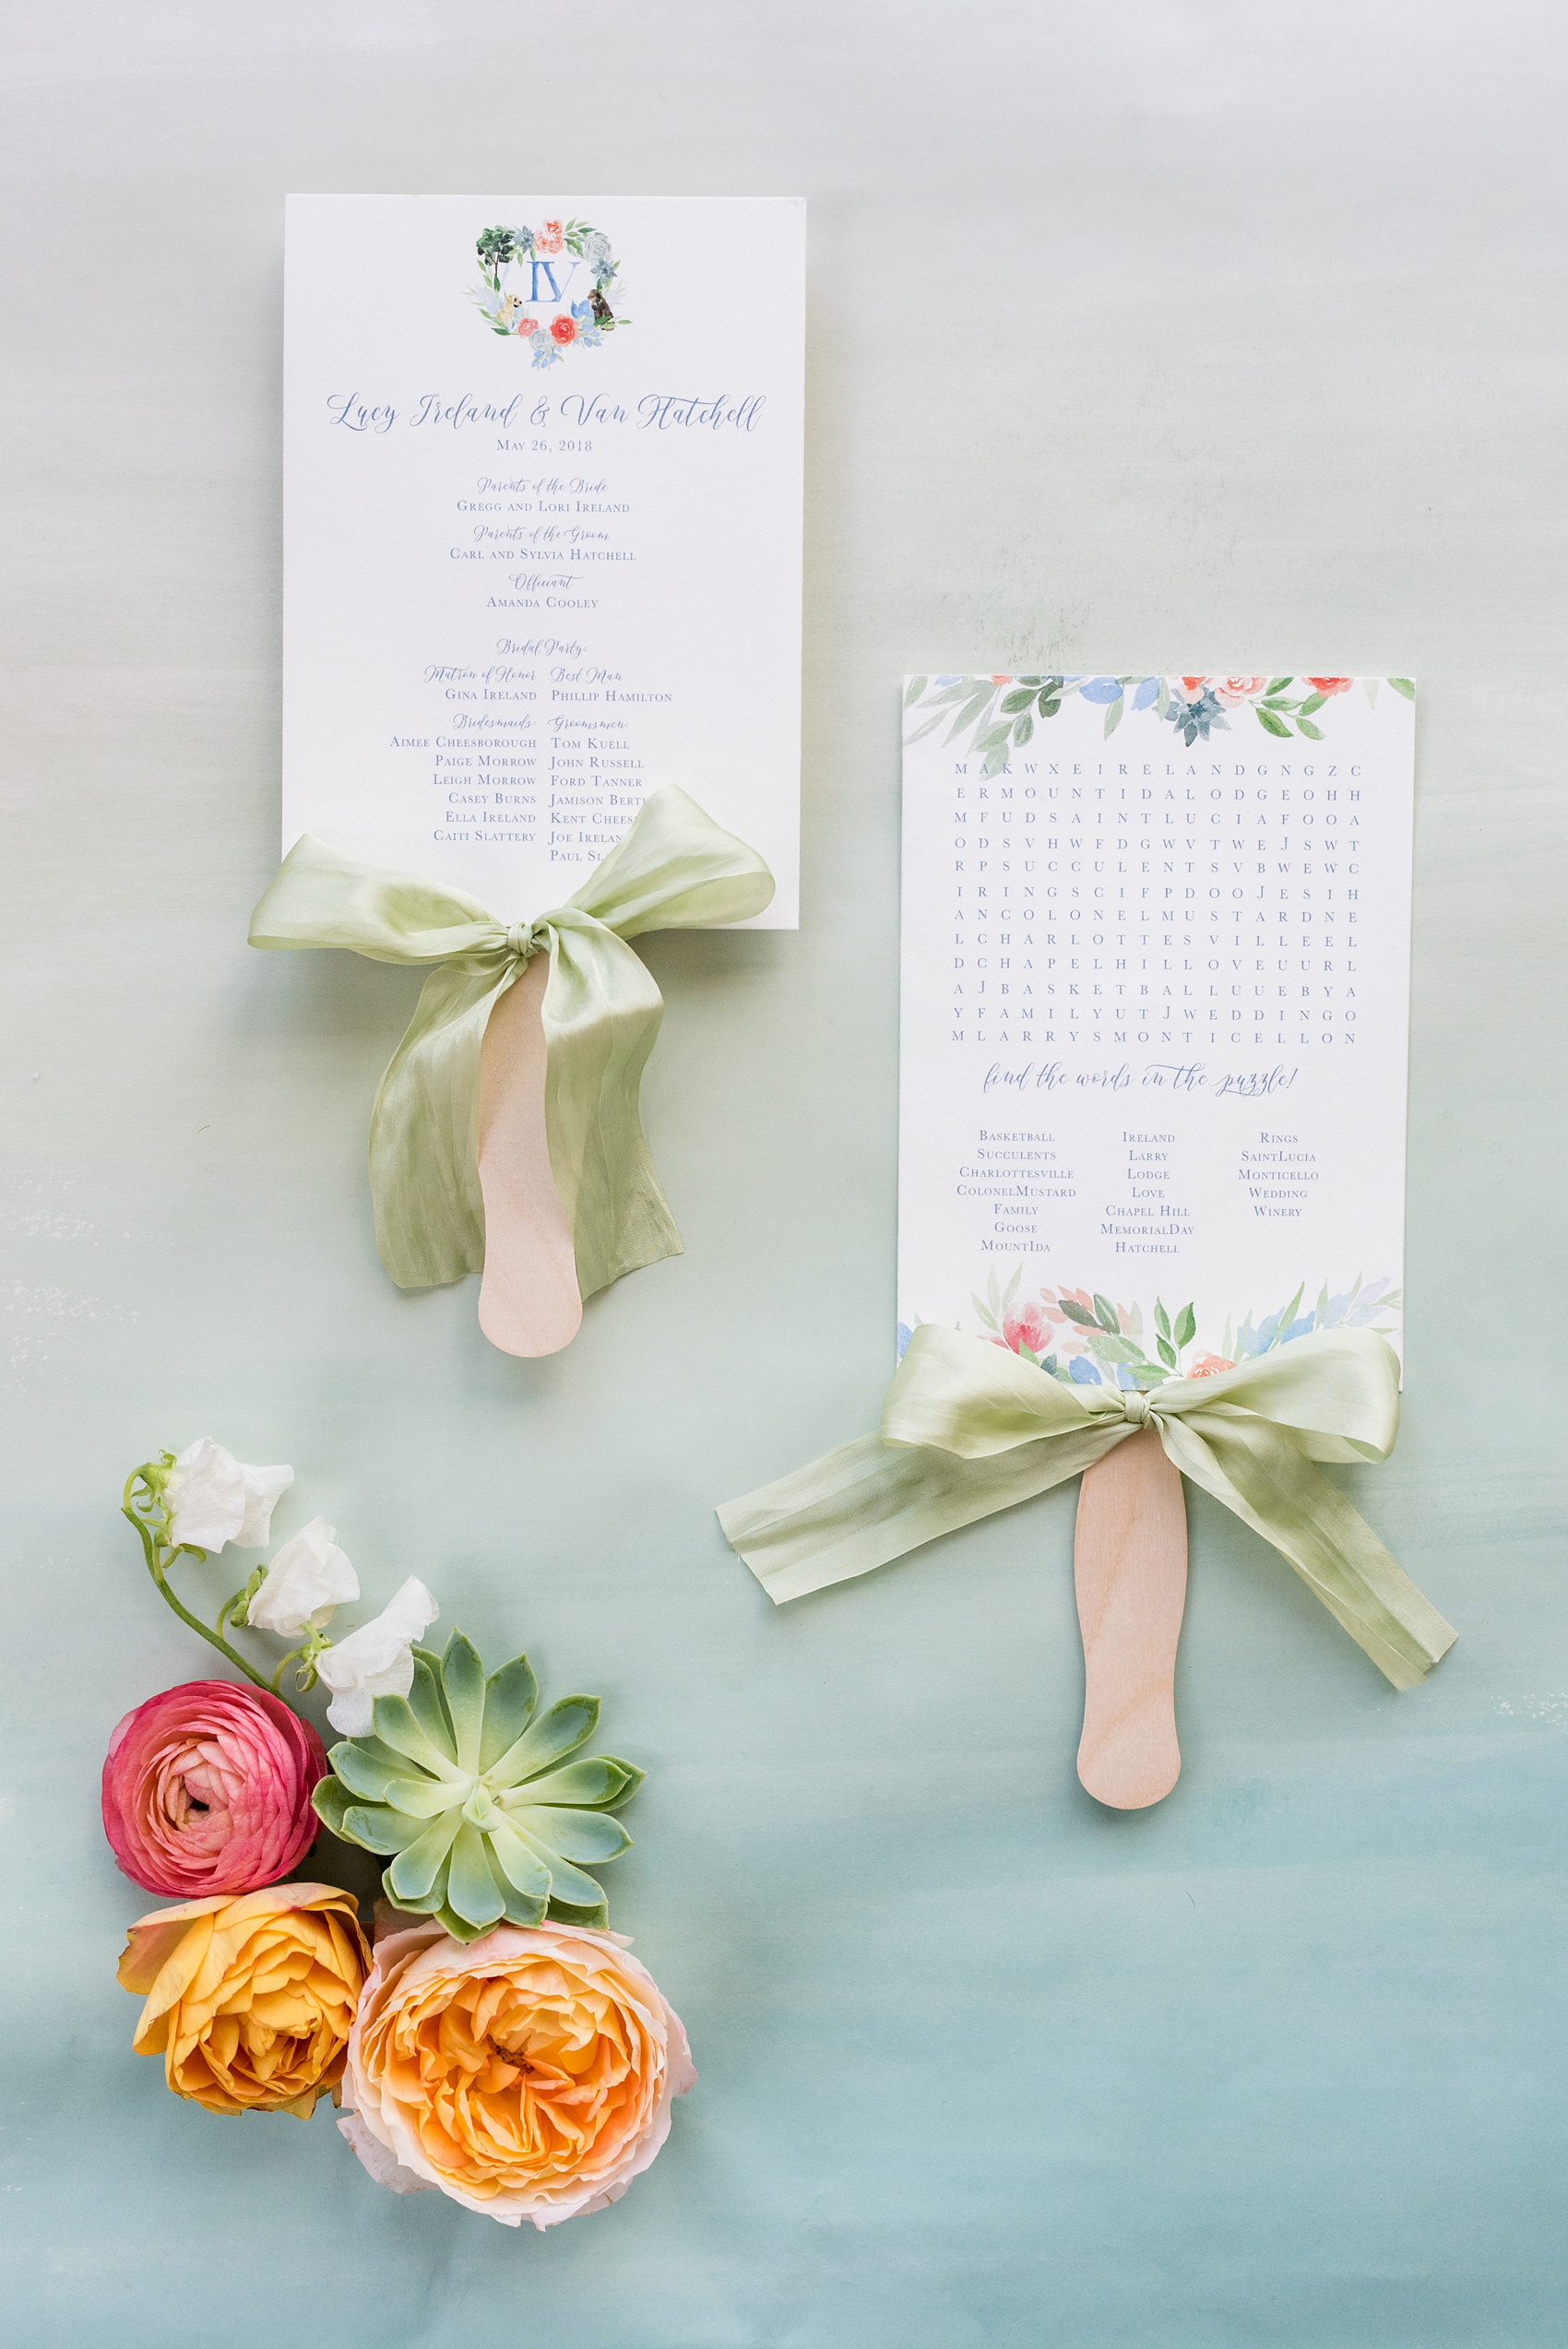 Charlottesville wedding photos by Mikkel Paige Photography. The couple had custom watercolors created for their logo and monogram by One and Only Paper for a complete stationery and invitation suite, including a folding welcome paper element. This Virginia venue is perfect for brides and grooms looking for a beautiful farm reception space. It’s green, romantic, and easy to dress up with flowers or keep simple! Click through for the complete post from this May event at the Lodge at Mount Ida Farm! Planning by @vivalevent and stationery by @oneandonlypaper. #Charlottesville #mountidafarm #lodgeatmountida #CharlottesvilleVA #CharlottesvilleVirginia #Charlottesvillewedding #Charlottesvilleweddingphotographer #mikkelpaige